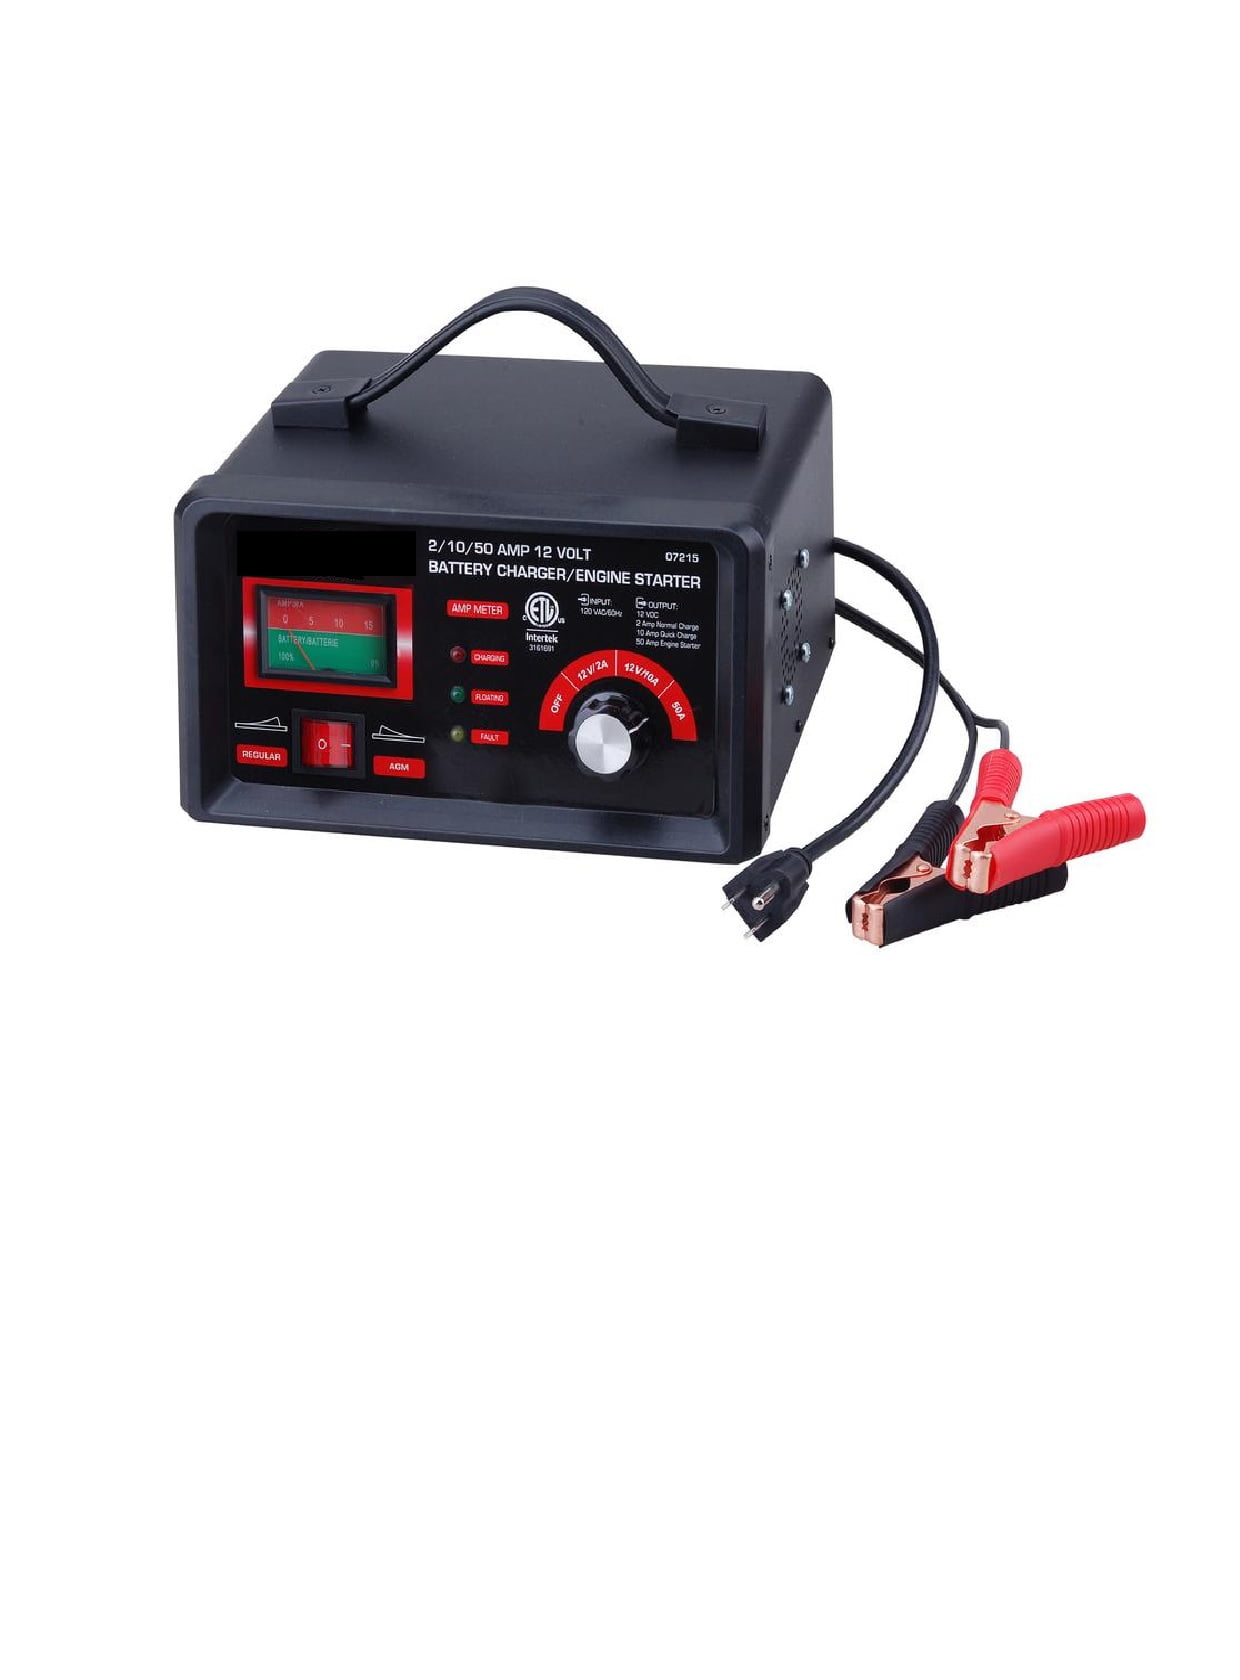 2/10/50 Amp, 12V Manual Charger with Engine Start